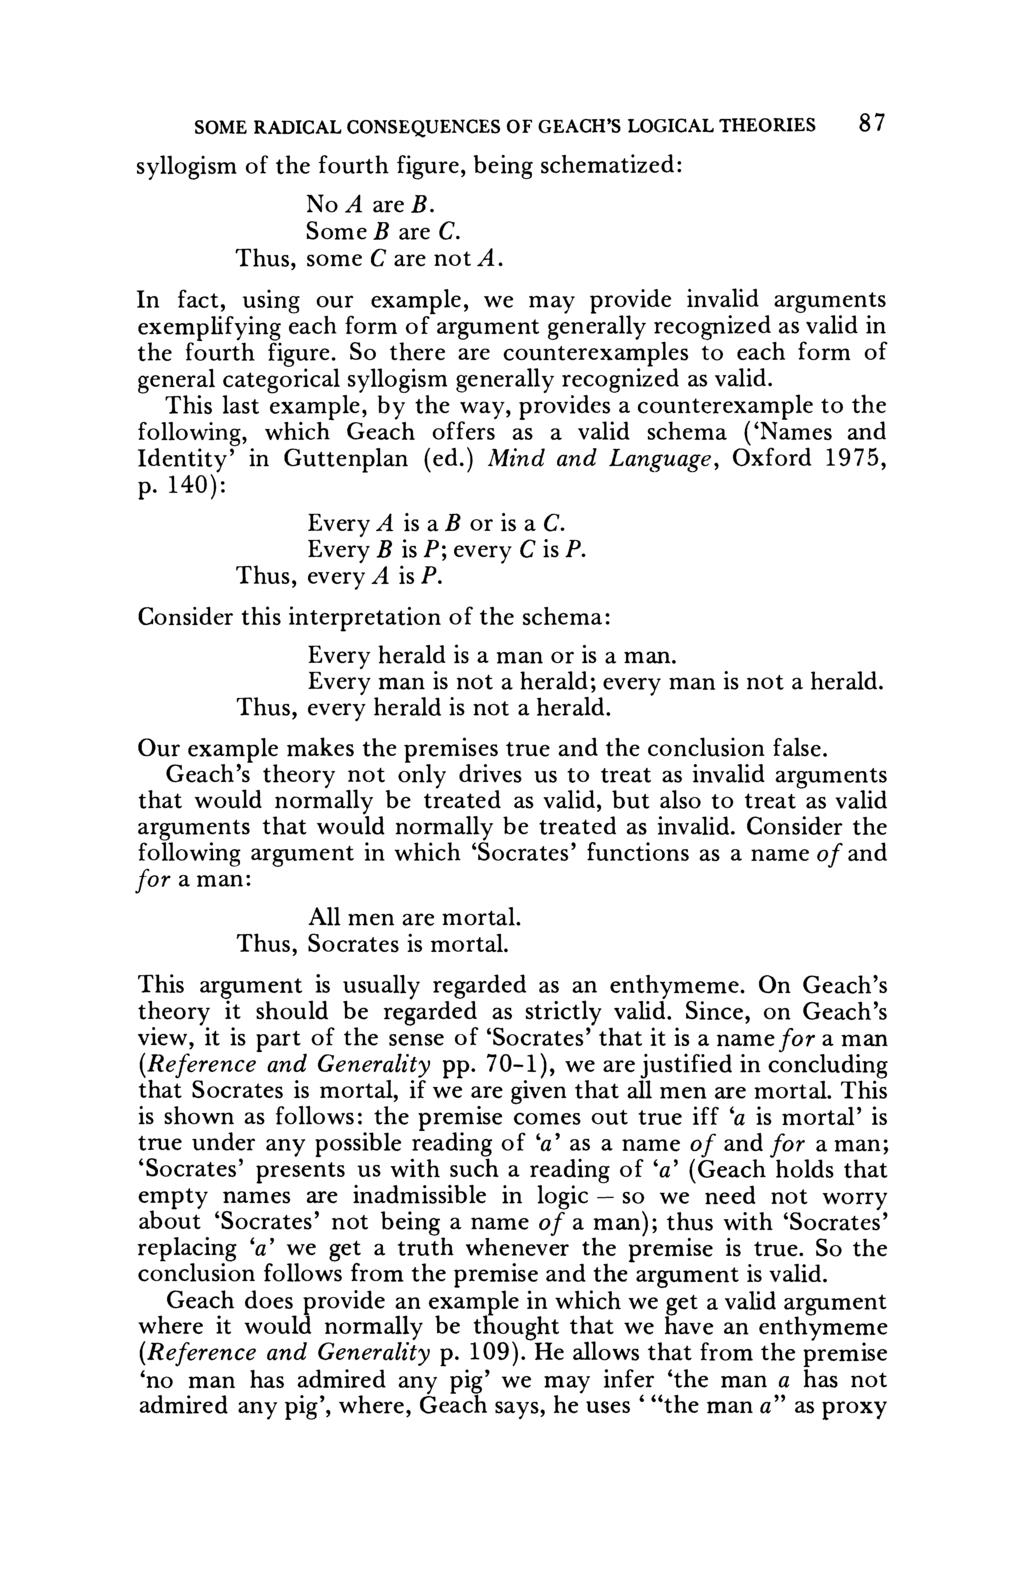 SOME RADICAL CONSEQUENCES OF GEACH'S LOGICAL THEORIES 8 7 syllogism of the fourth figure, being schematized: No A are B. Some Bare C. Thus, some Care not A.